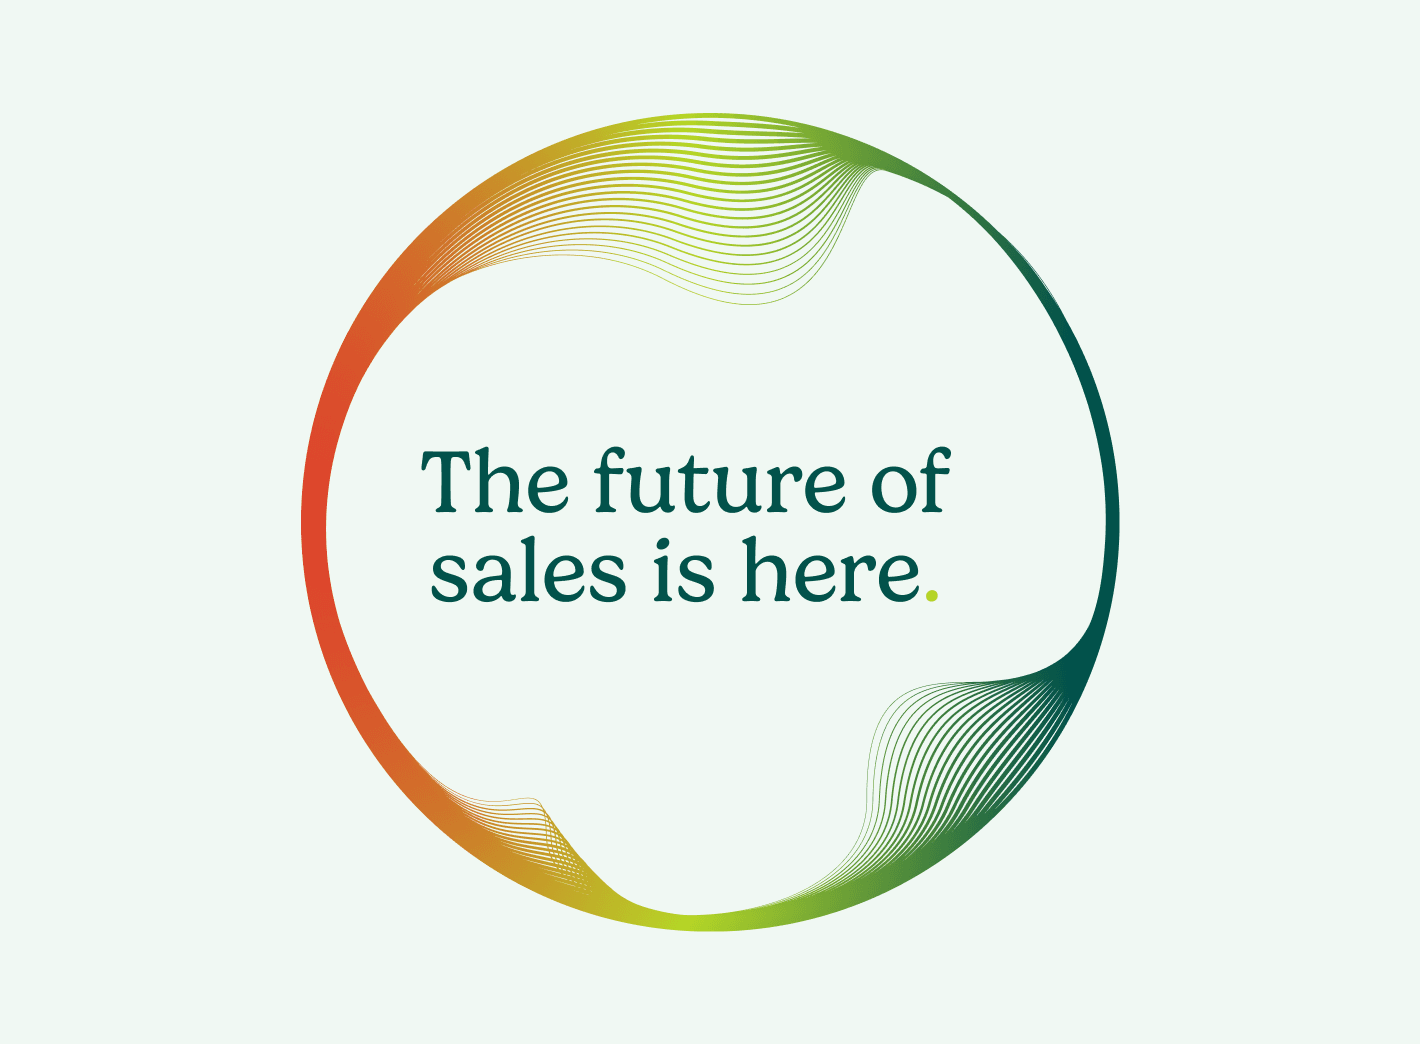 "The future of sales is here"